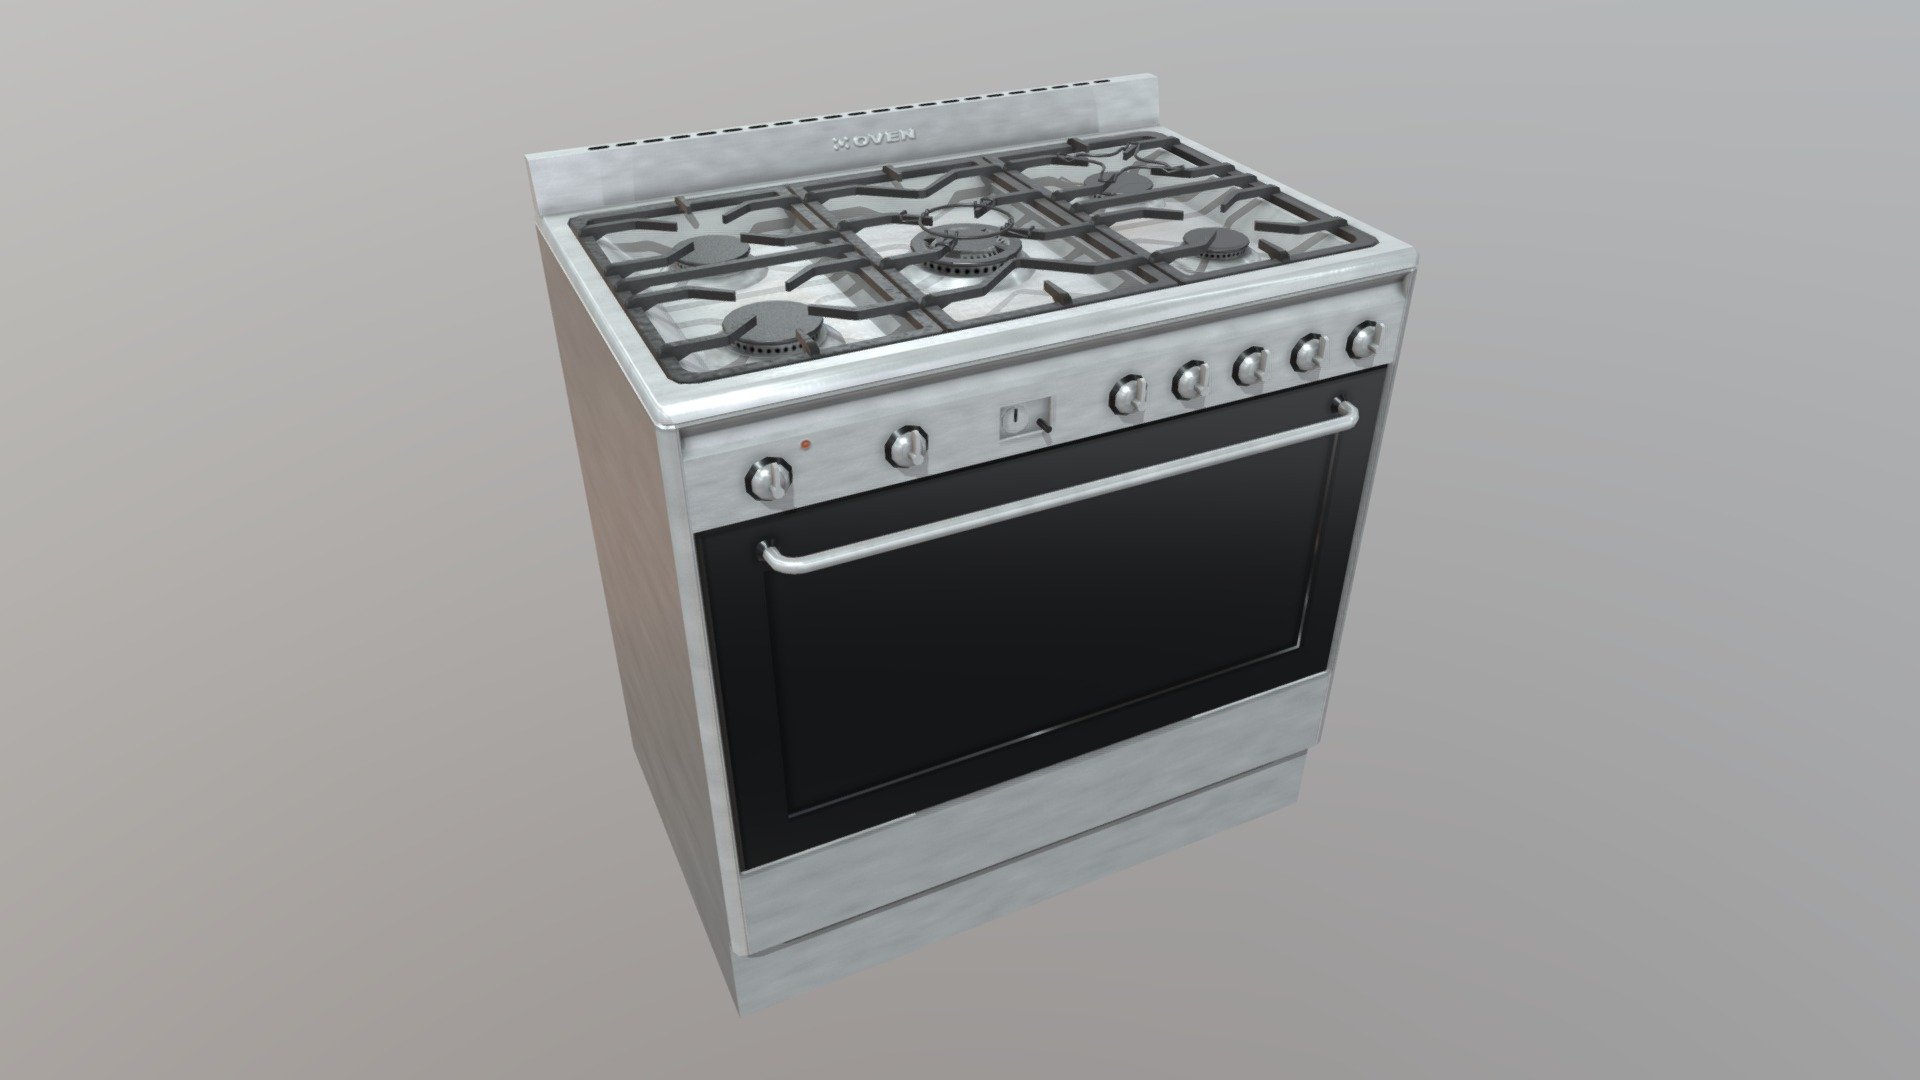 Oven with stovetop